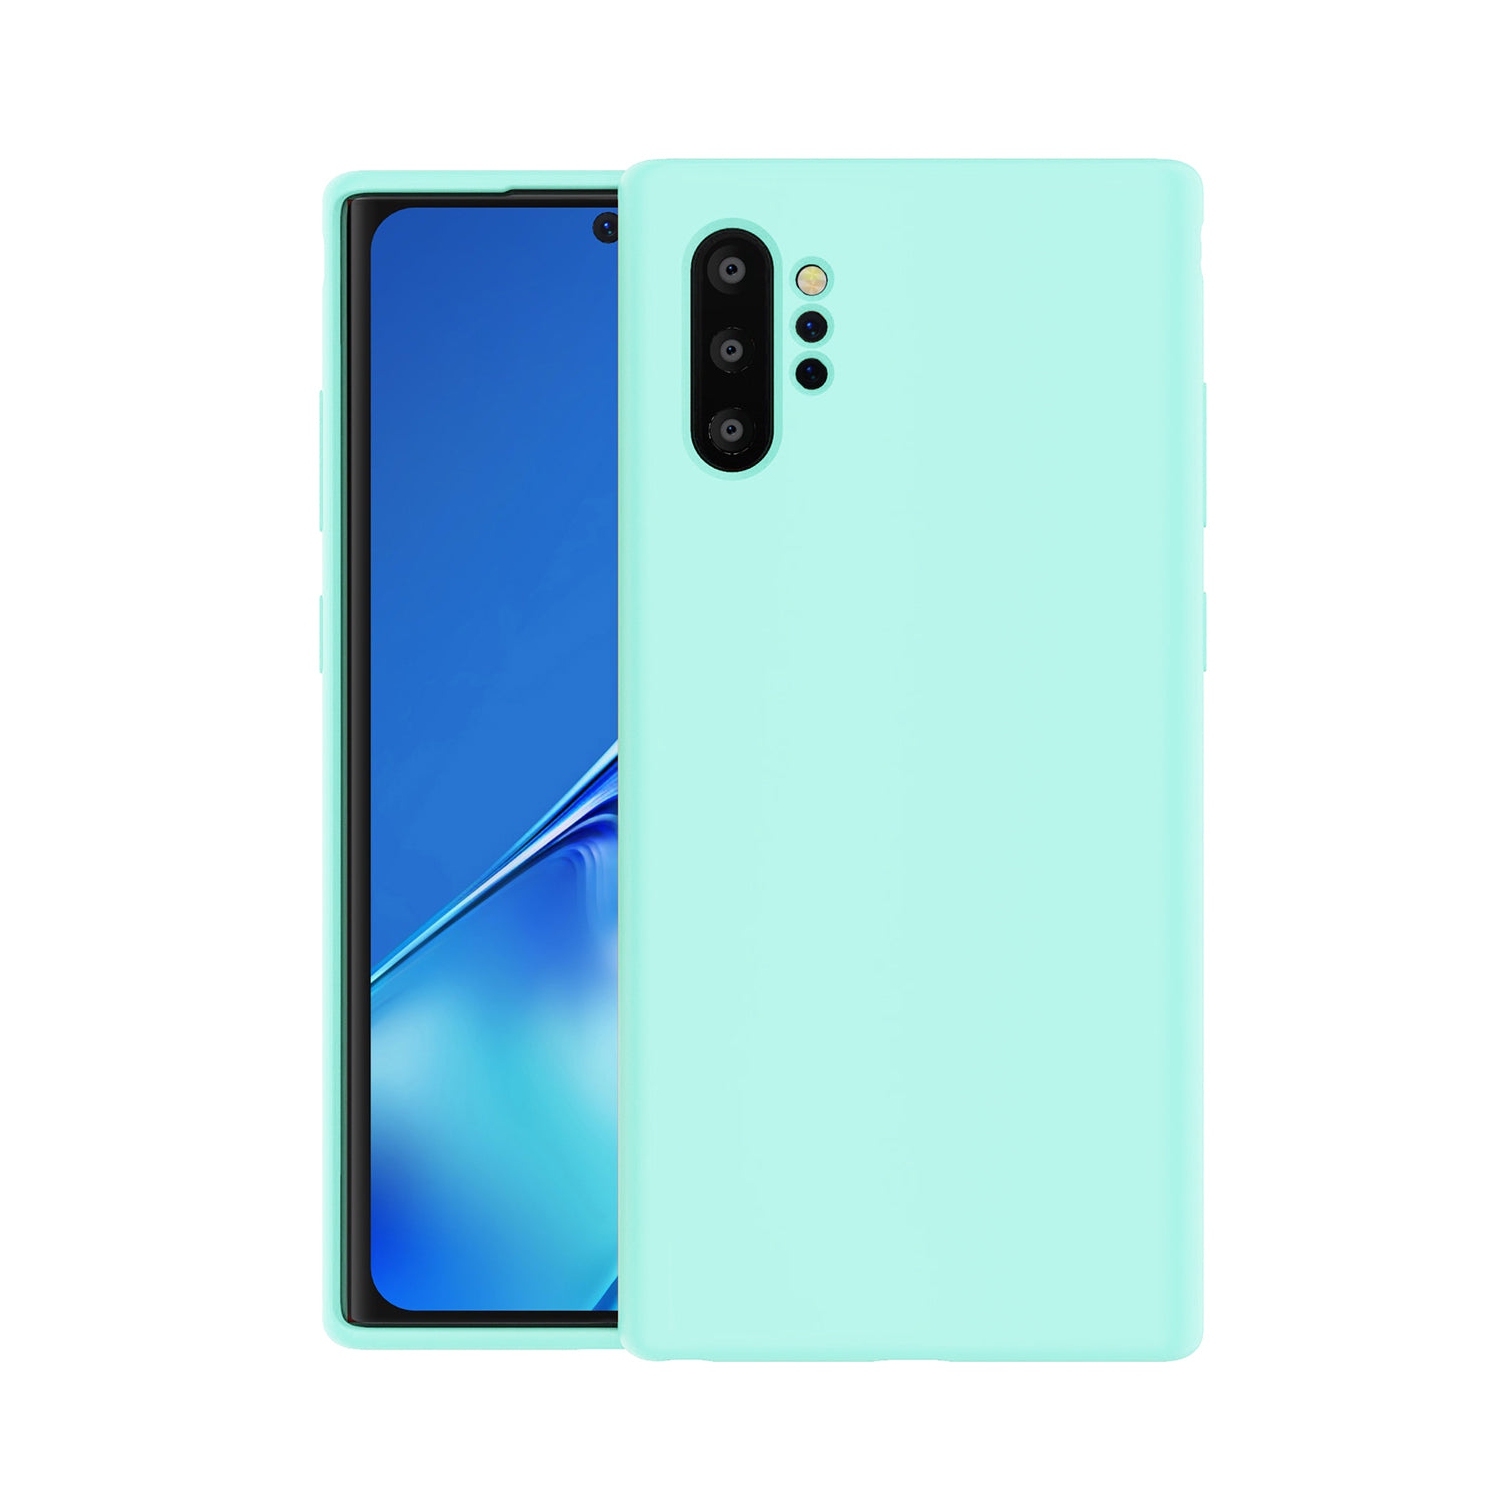 PANDACO Soft Shell Matte Mint Blue Case for Samsung Galaxy Note 10+